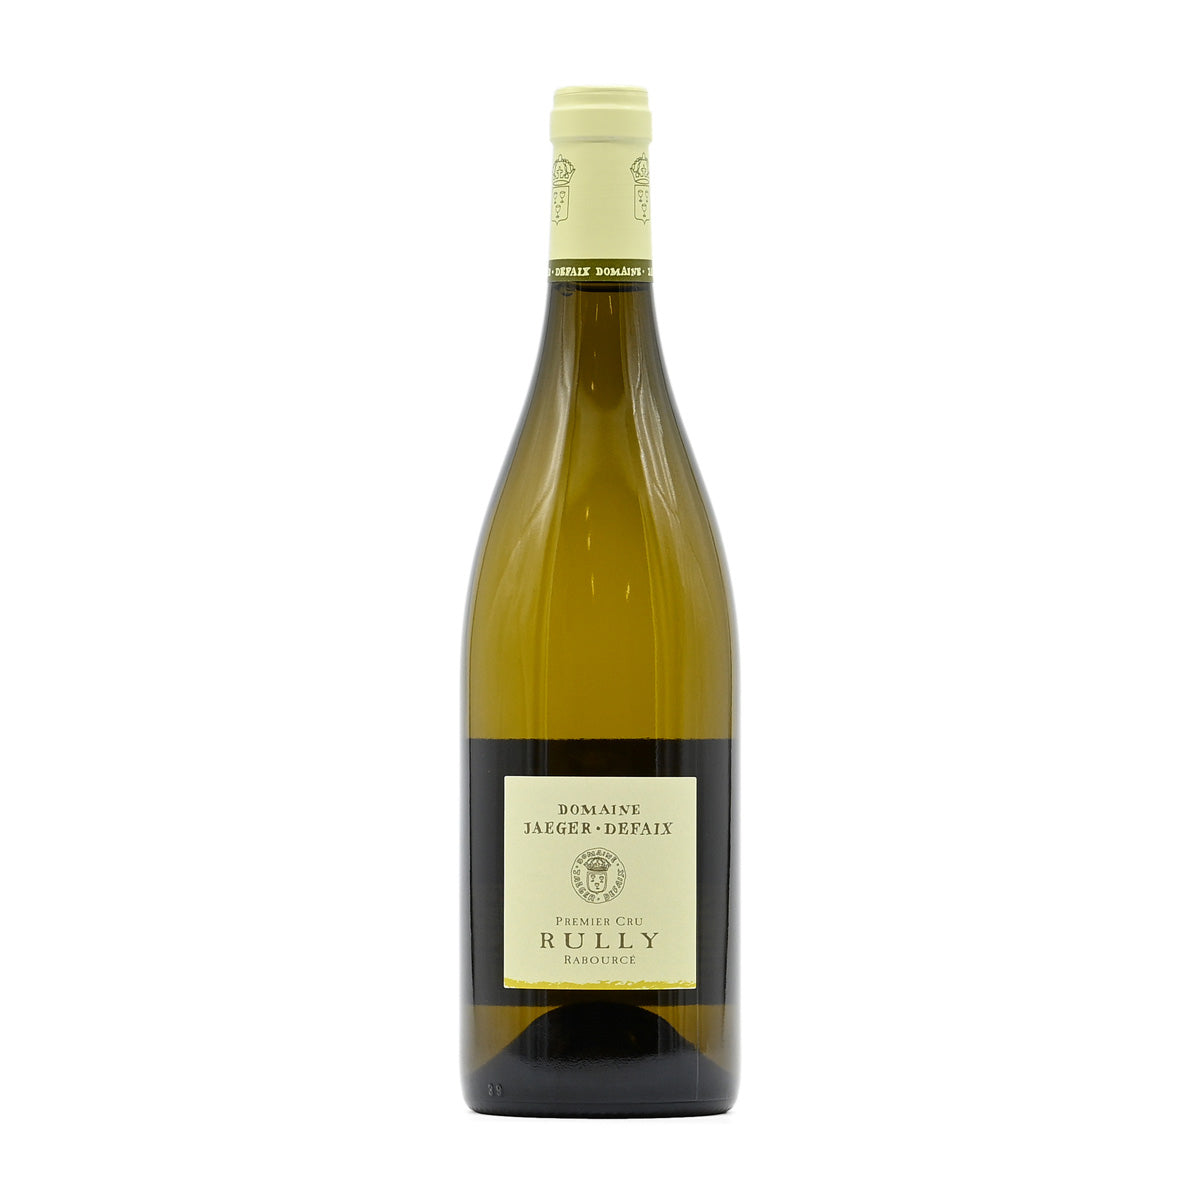 Domaine Jaeger Defaix Rully 1er Cru Rabource Blanc 2021, 750ml French white wine; made from Chardonnay; from Rully, Premier Cru Burgundy, France – GDV Fine Wines, Hong Kong